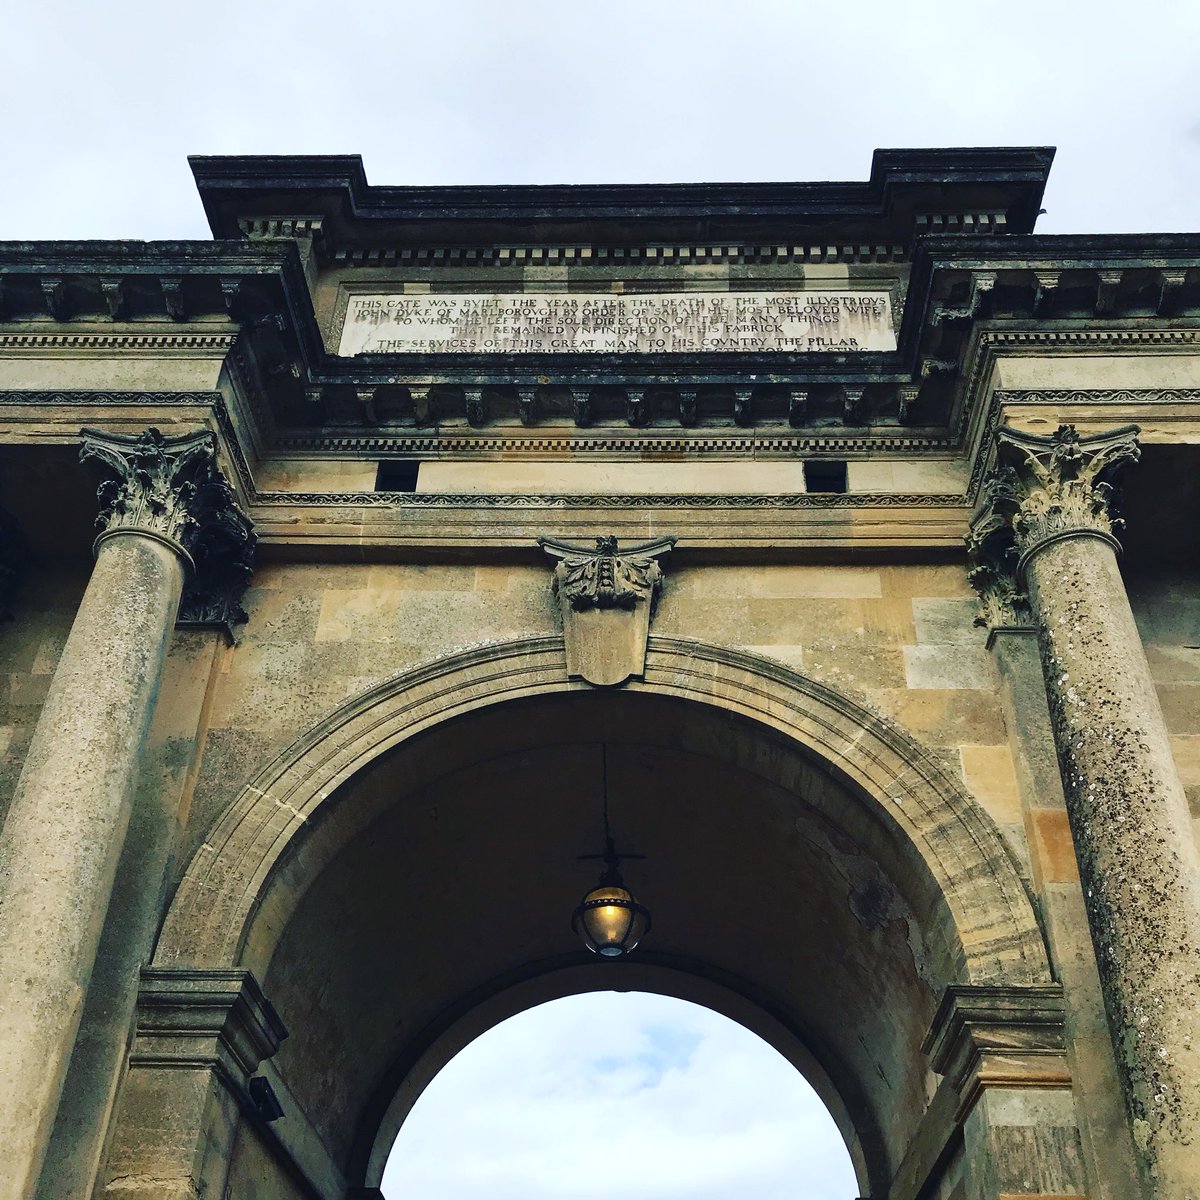 A grand entrance into Blenheim Palace, one of my favourite places in the Cotswolds! 
#woodstock #blenheimpalace #cotswolds #winstonchurchill #architecture #discoverengland #england #beautifulplace